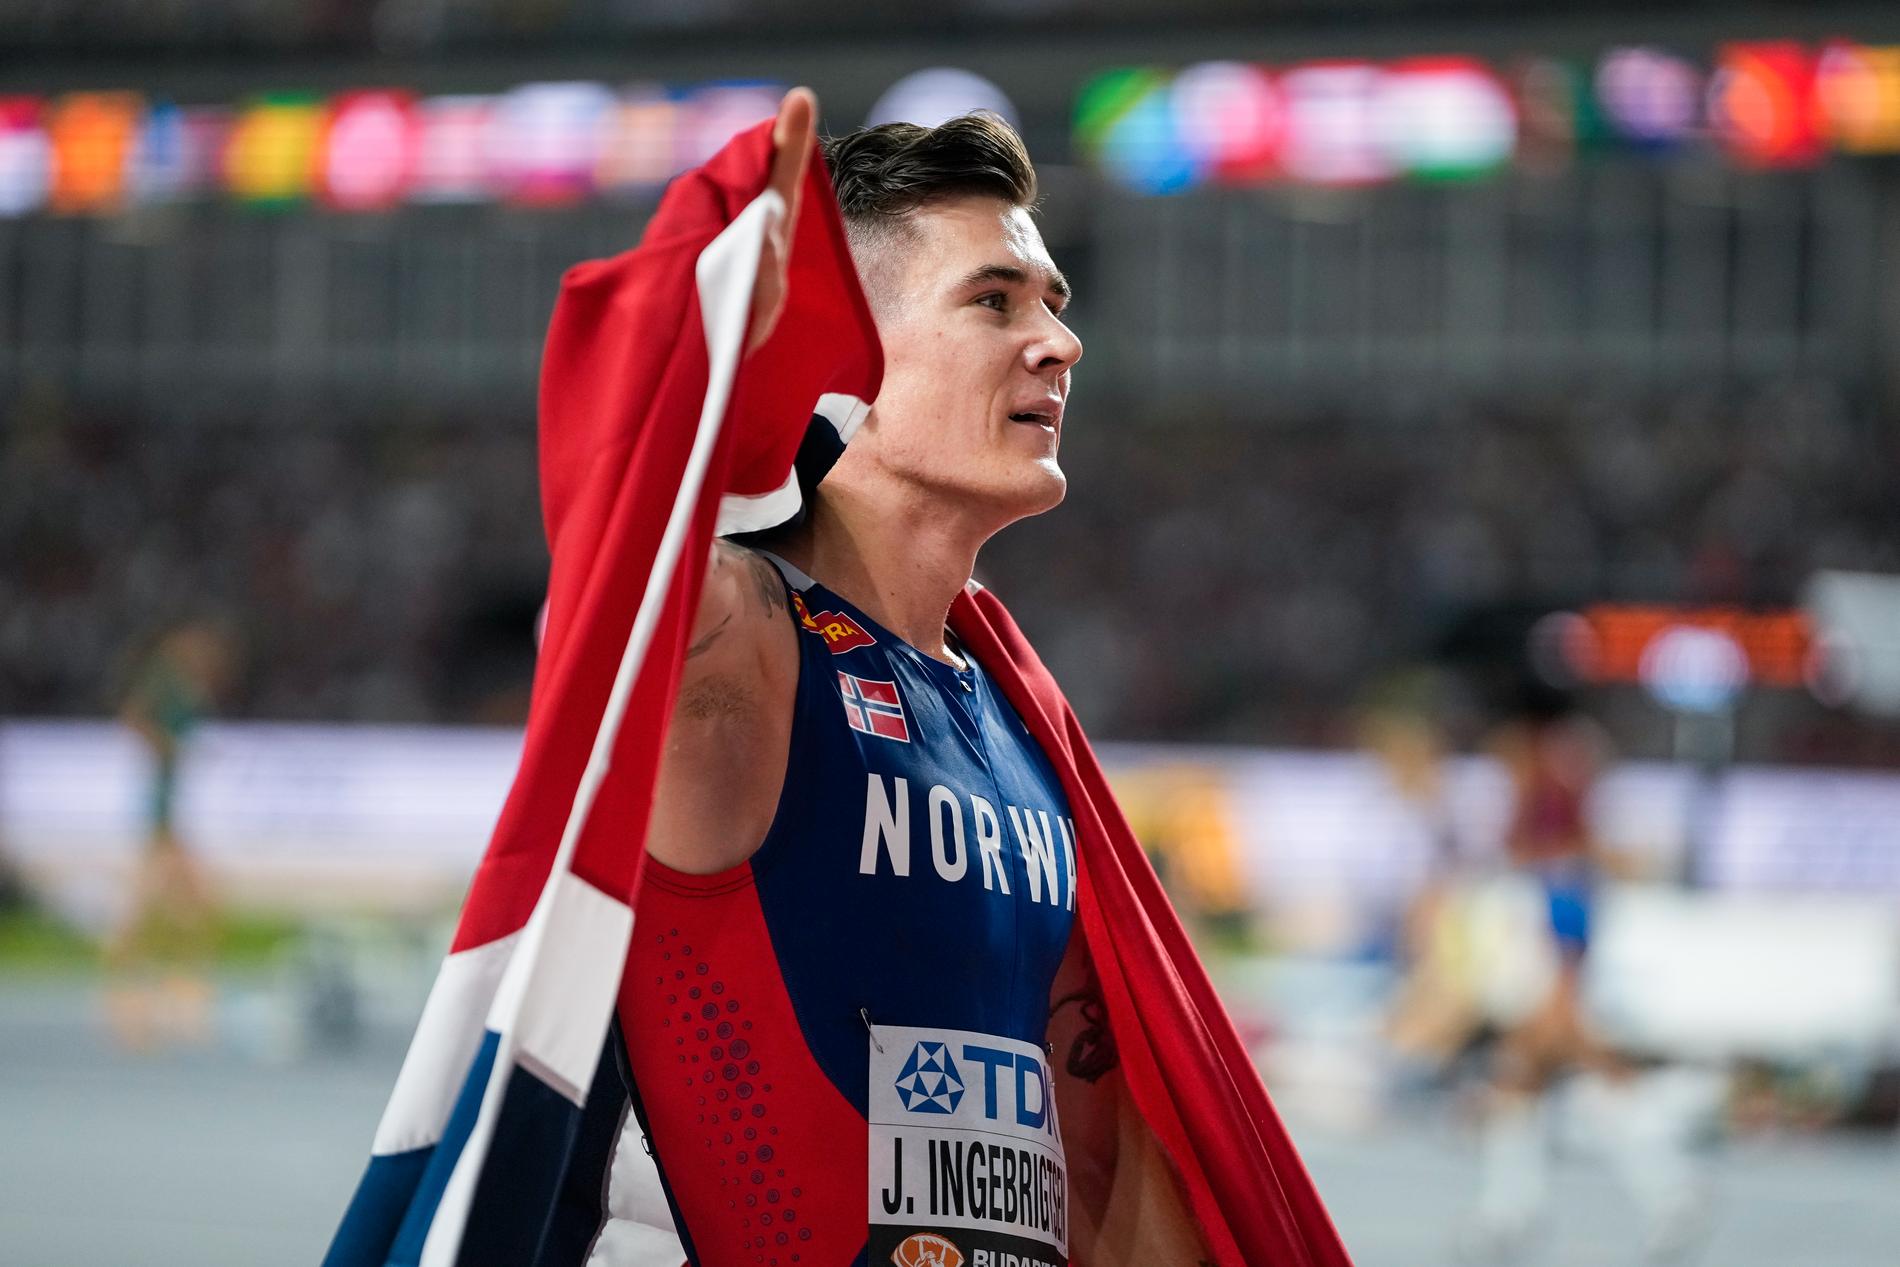 Researchers have studied GPS data from Jakob Ingebrigtsen's gold rush – and now the answers are clear